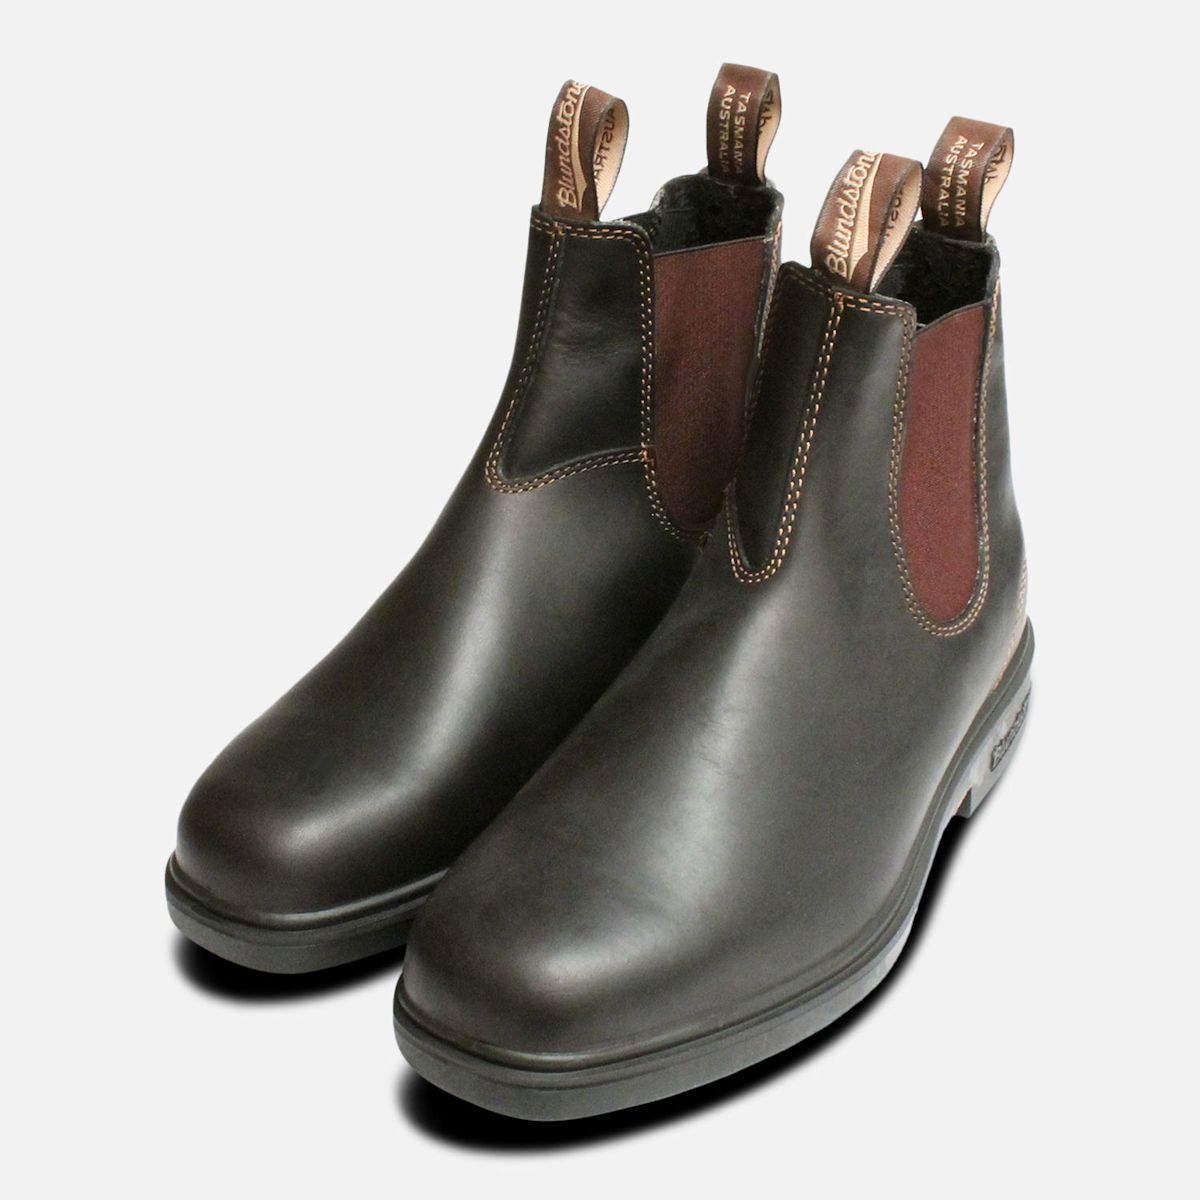 Blundstone 62 Womens Work Chelsea Boots In Stout Brown UK Sizes 3-7